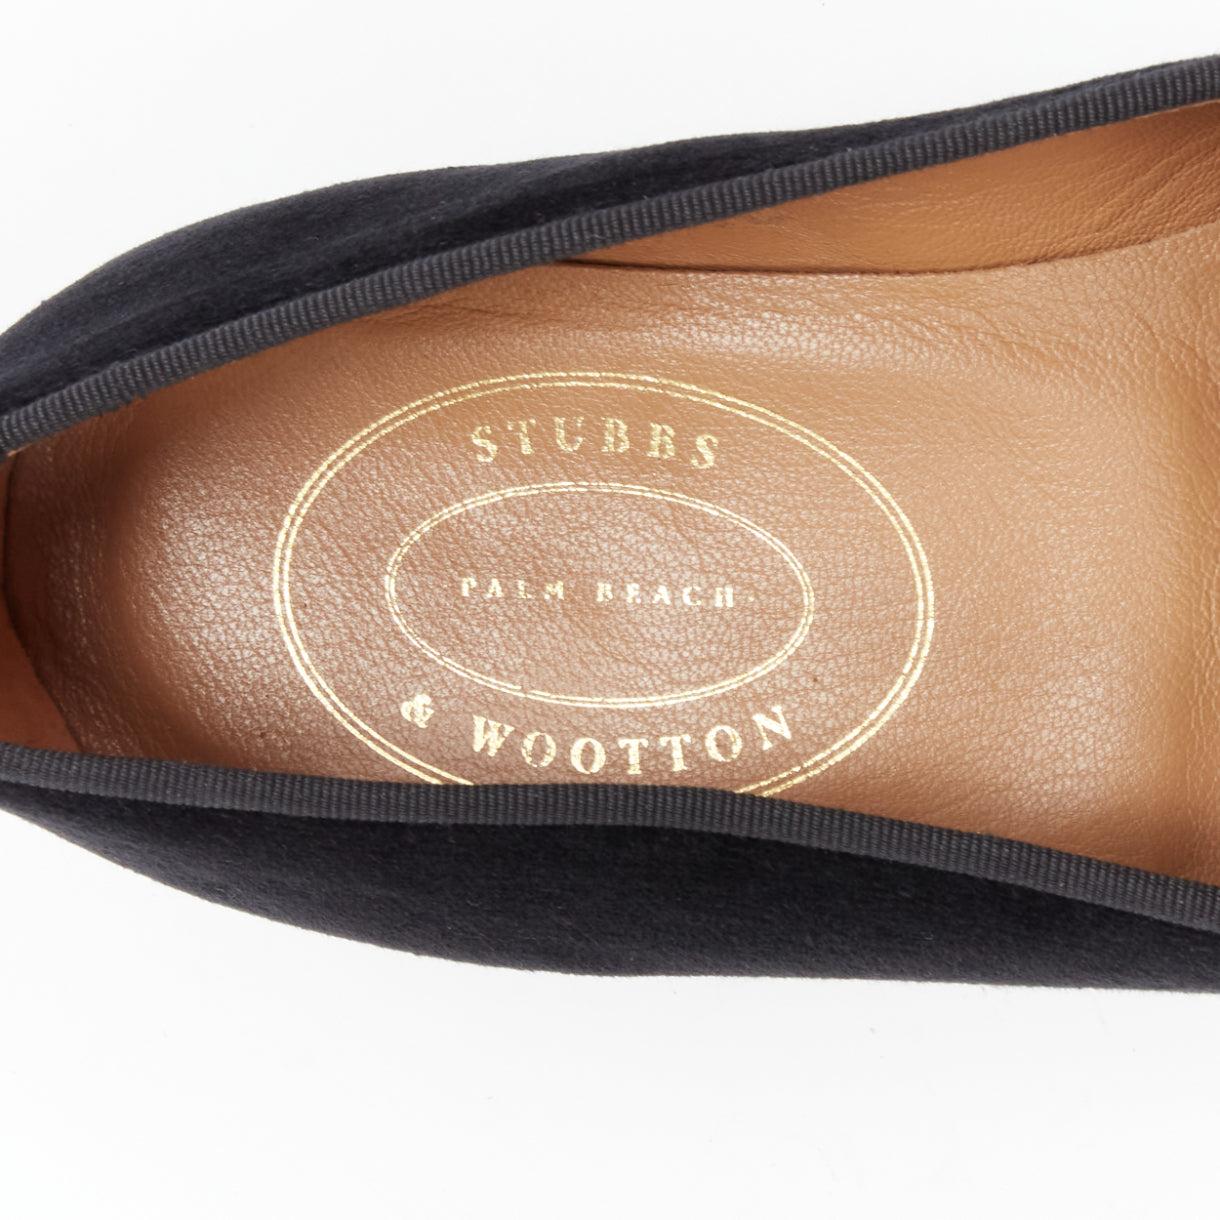 STUBBS WOOTTON The End embroidery black velvet loafer smoking slippers US9 EU42 4